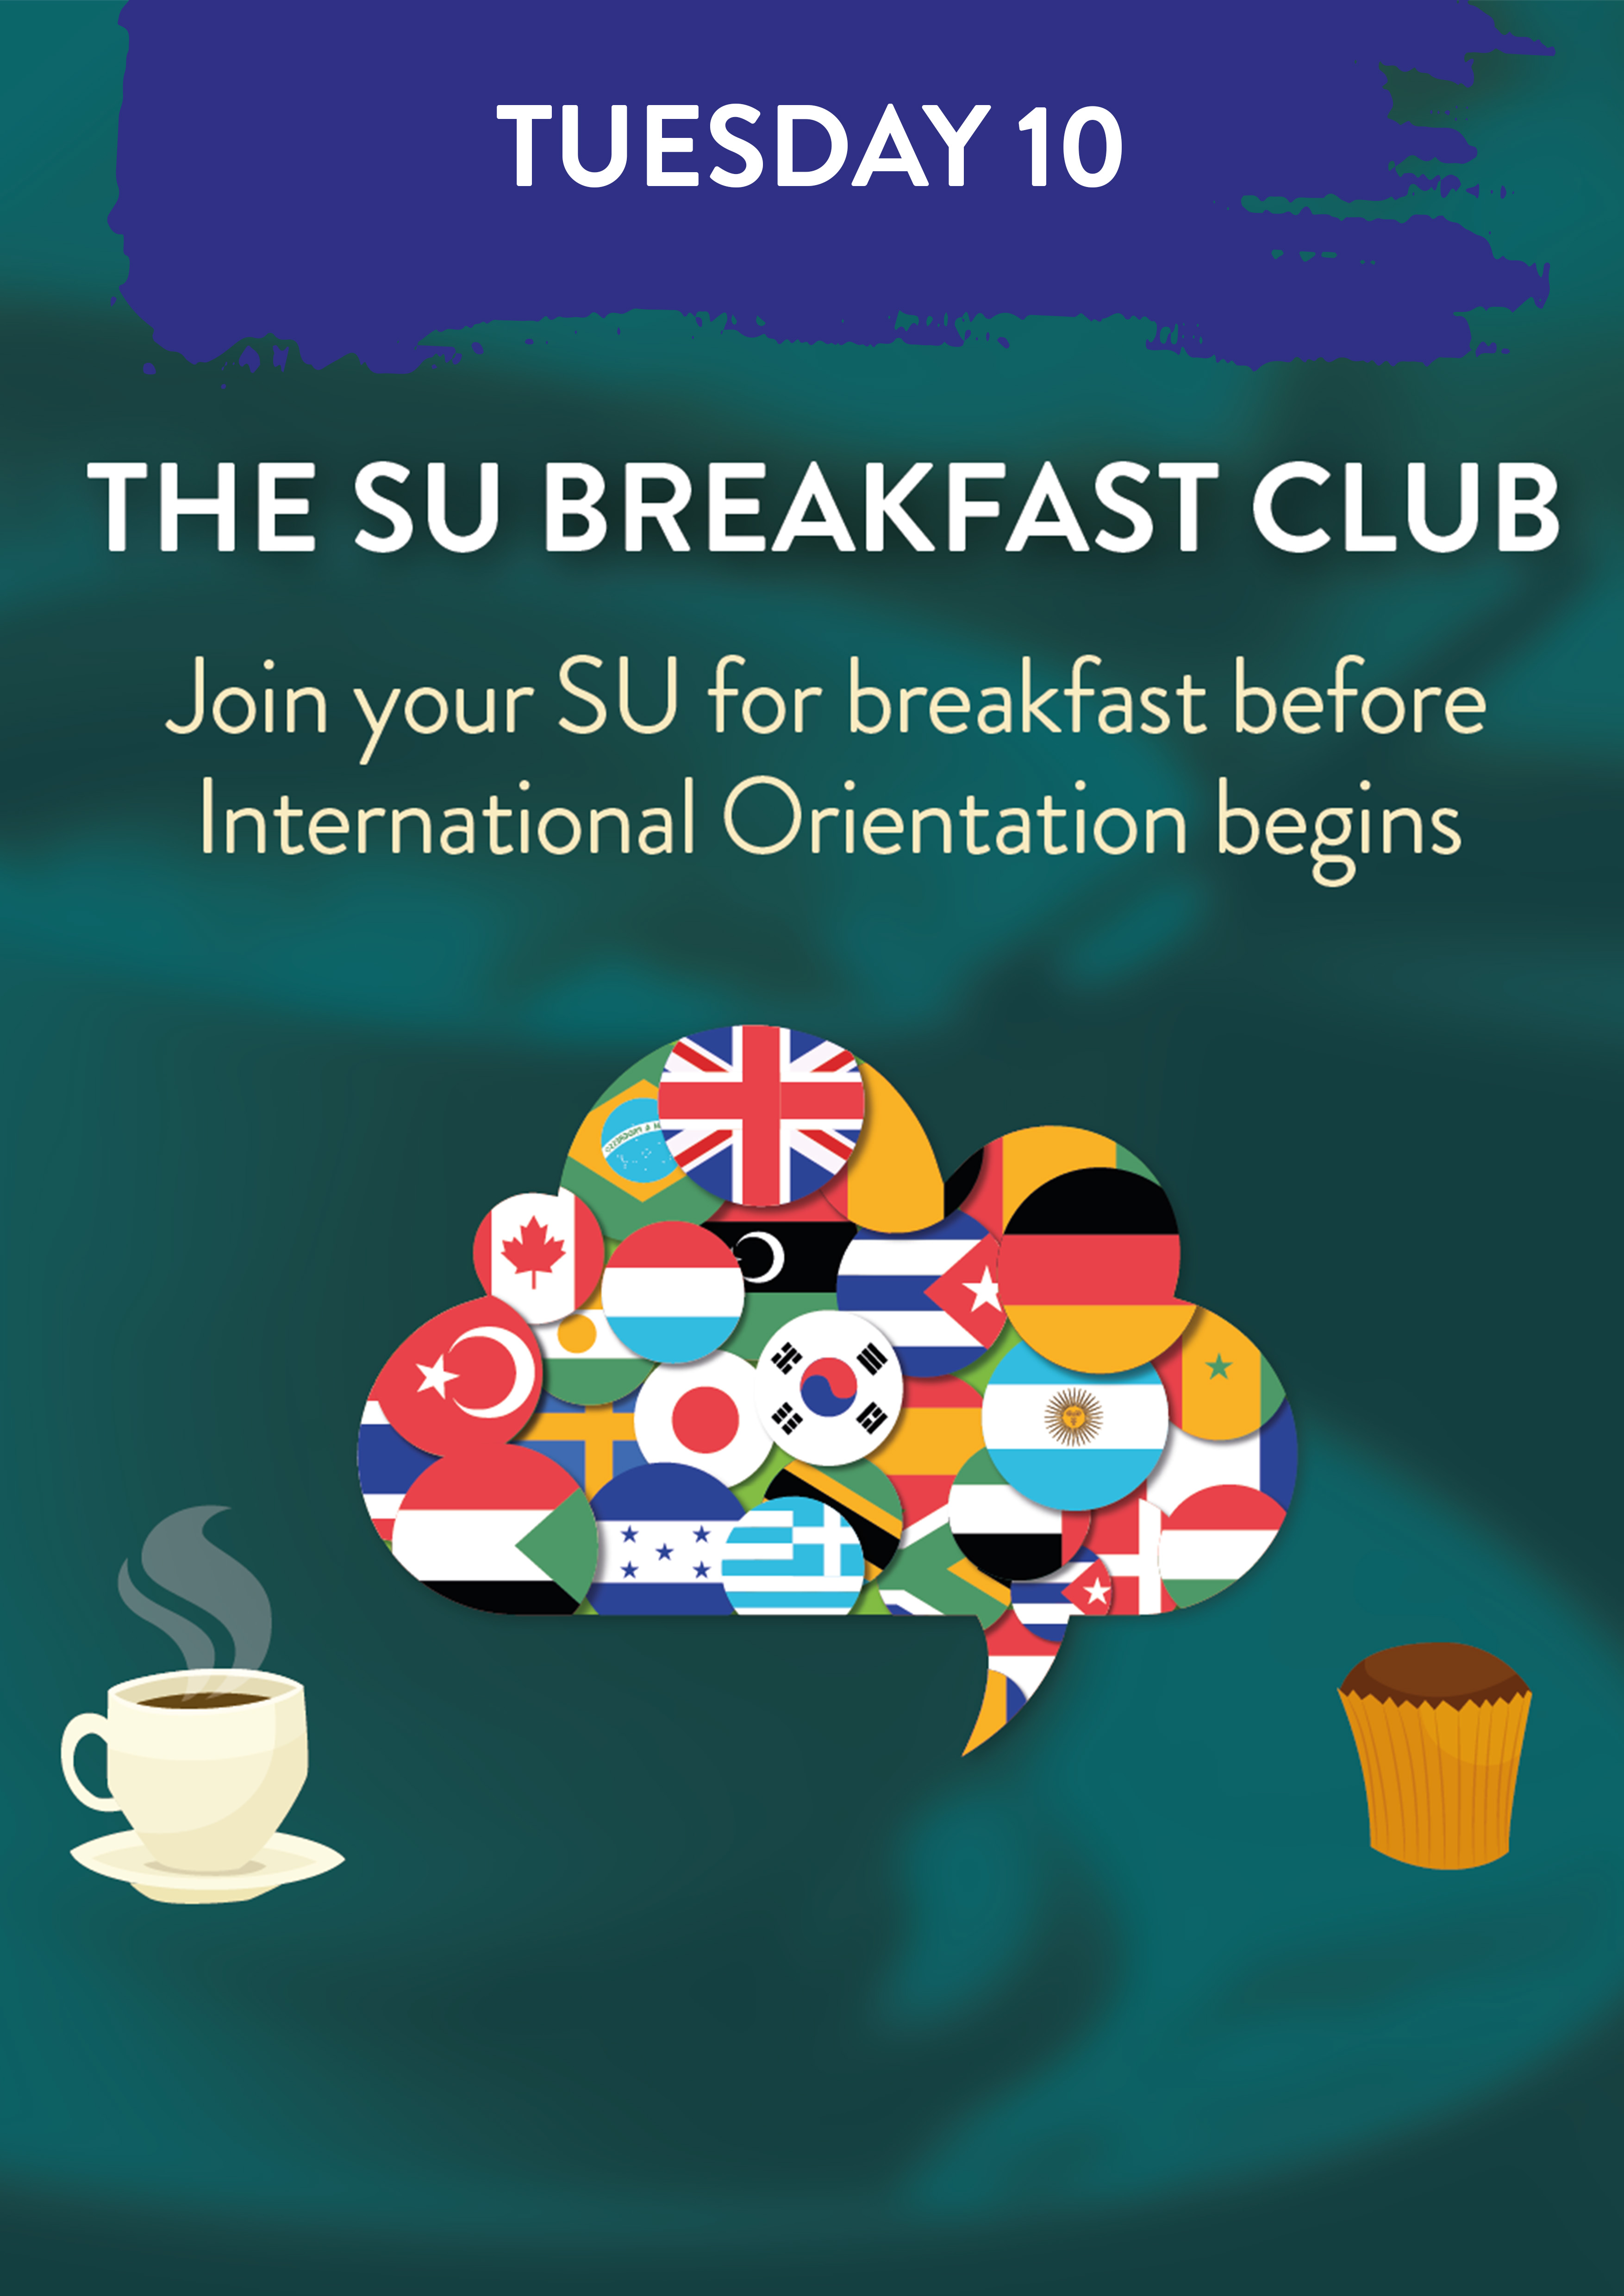 Tuesday 10 January. The SU Breakfast Club. Join your SU for breakfast before International Orientation begins.